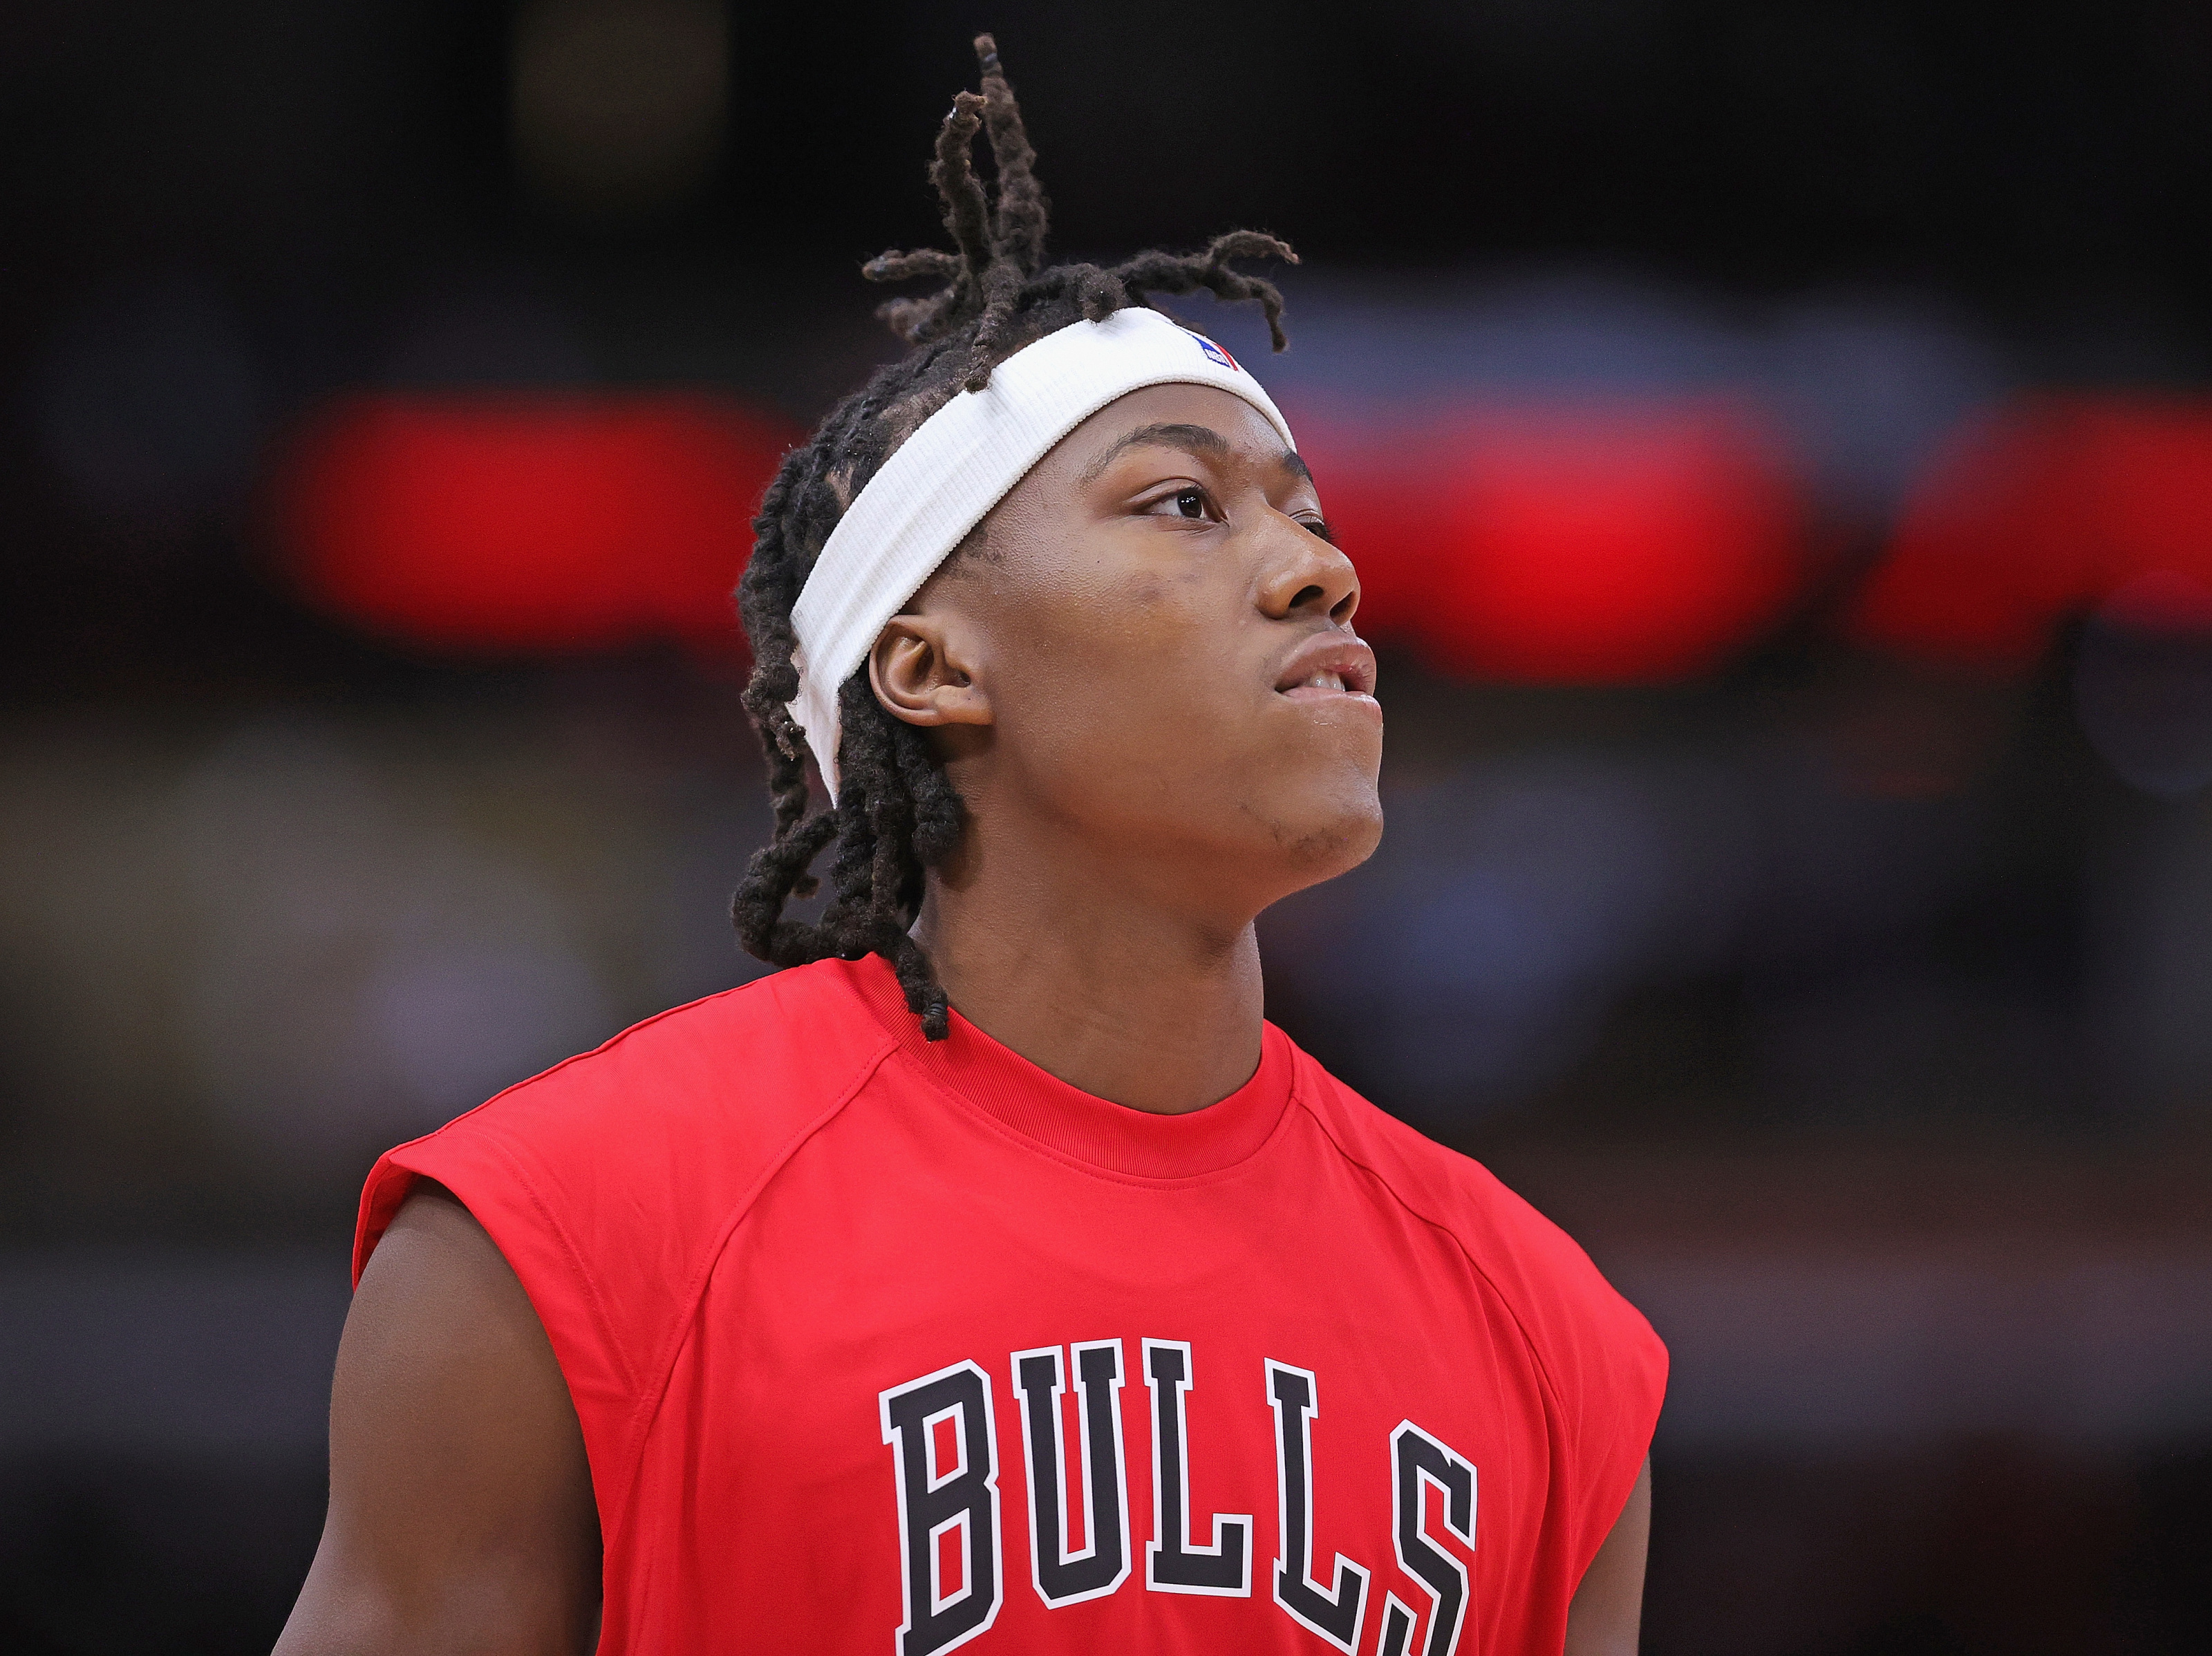 The Bulls Put Out an Awesome Mini-Doc on Ayo Dosunmu's Chicago